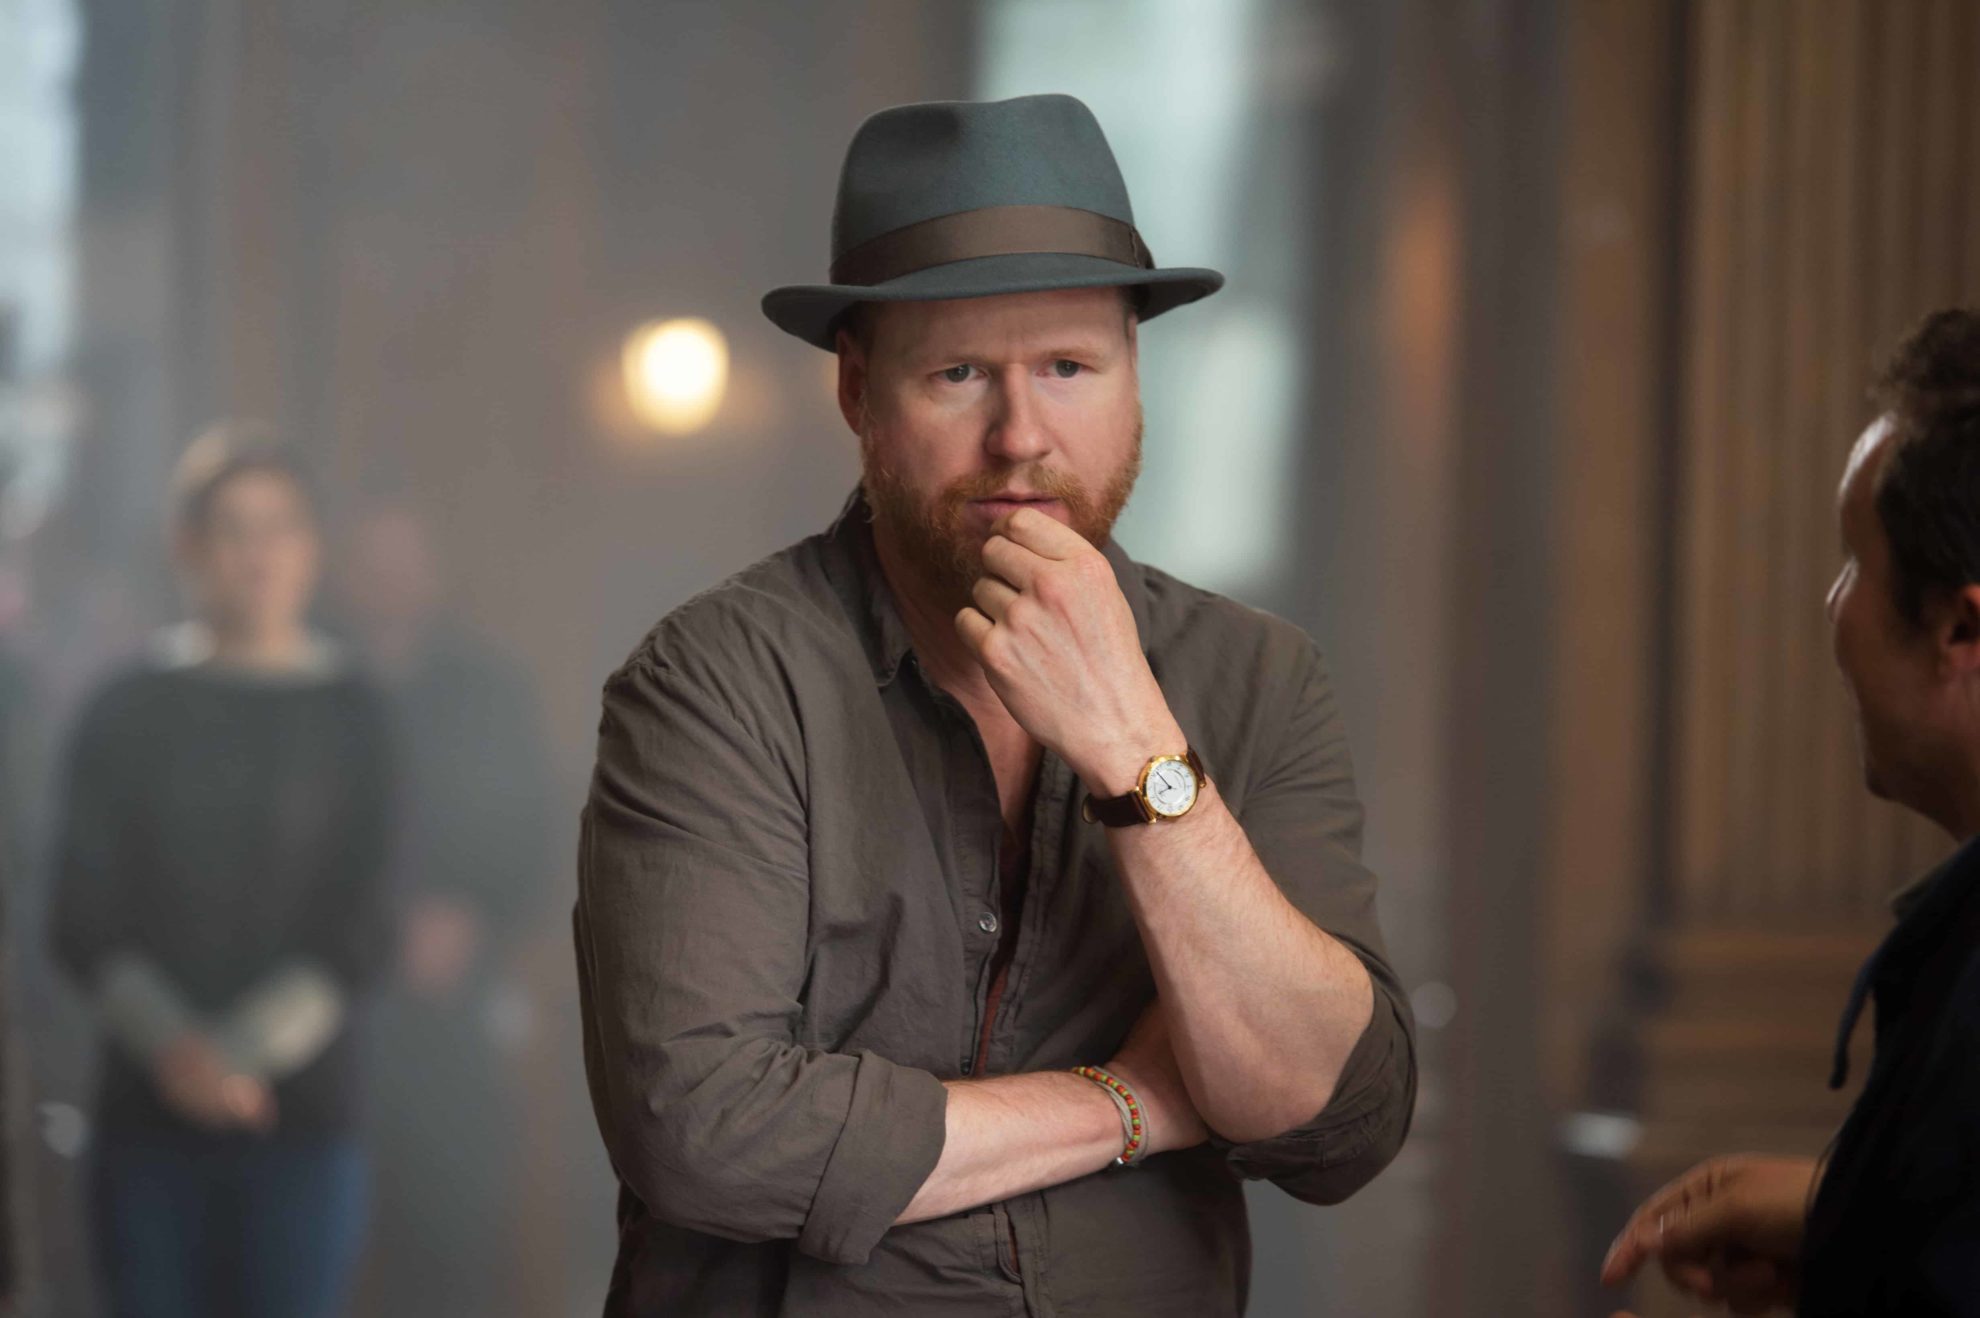 Exclusive interview with Director Joss Whedon of Avengers: Ager of Ultron. He shares what pop culture influences him, and more! #AvengersEvent